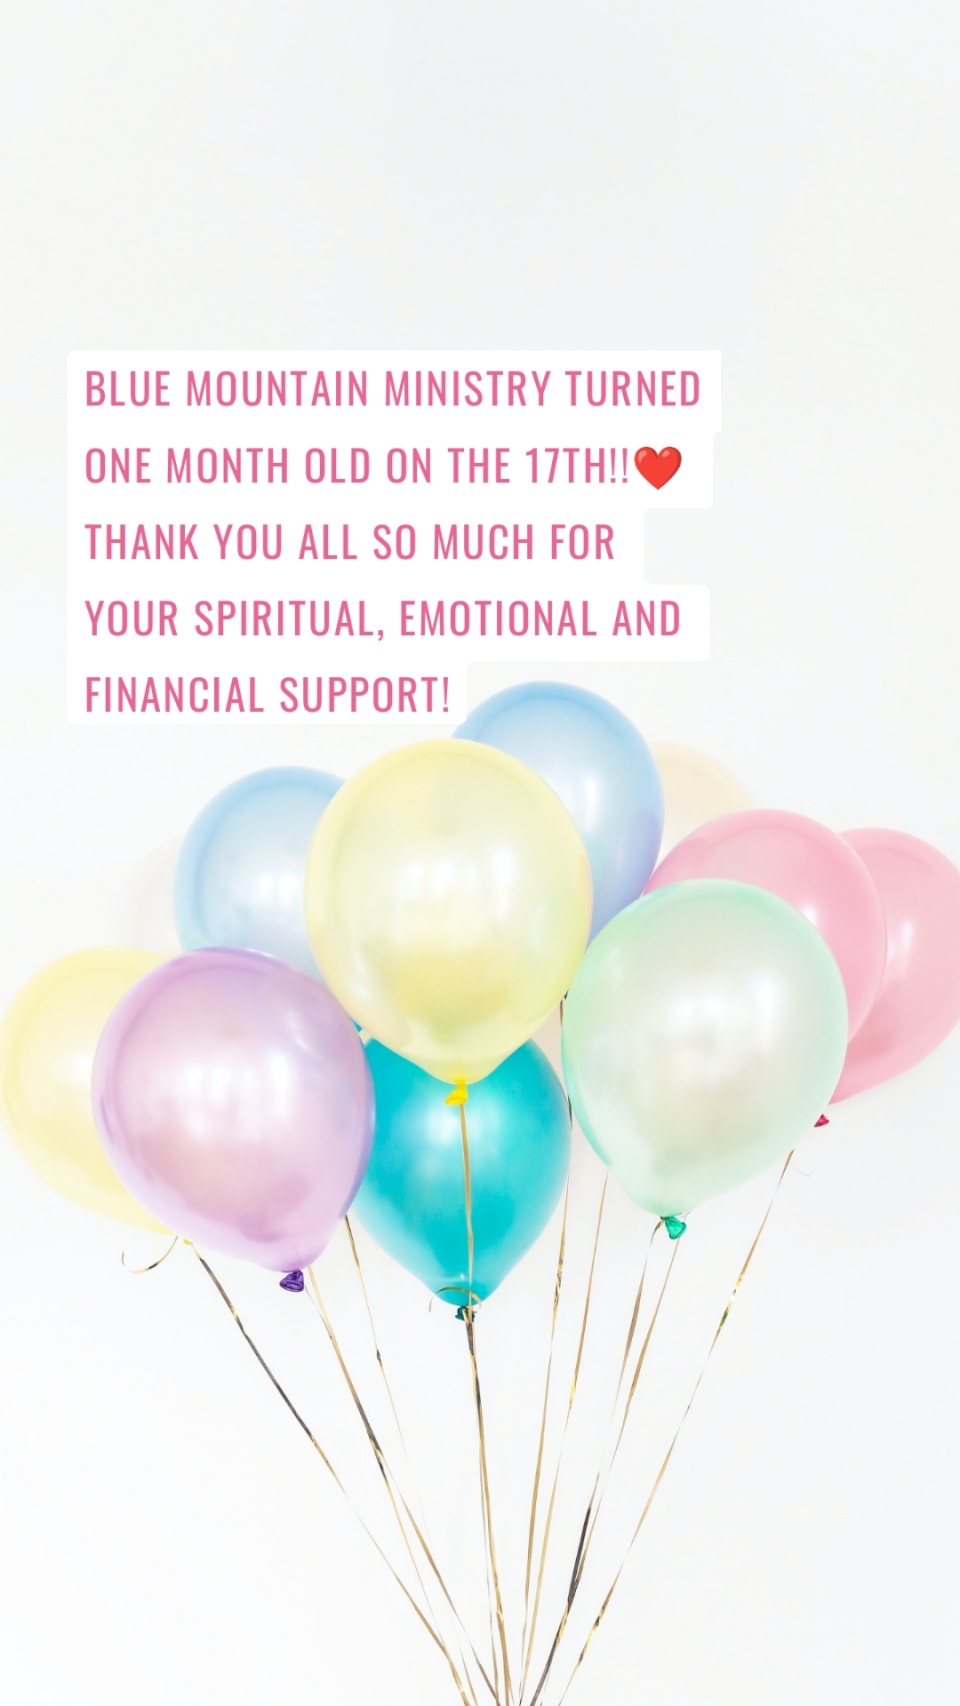 Blue Mountain Ministry turned one month old on the 17th!!❤️ Thank you all so much for your spiritual, emotional and financial support!